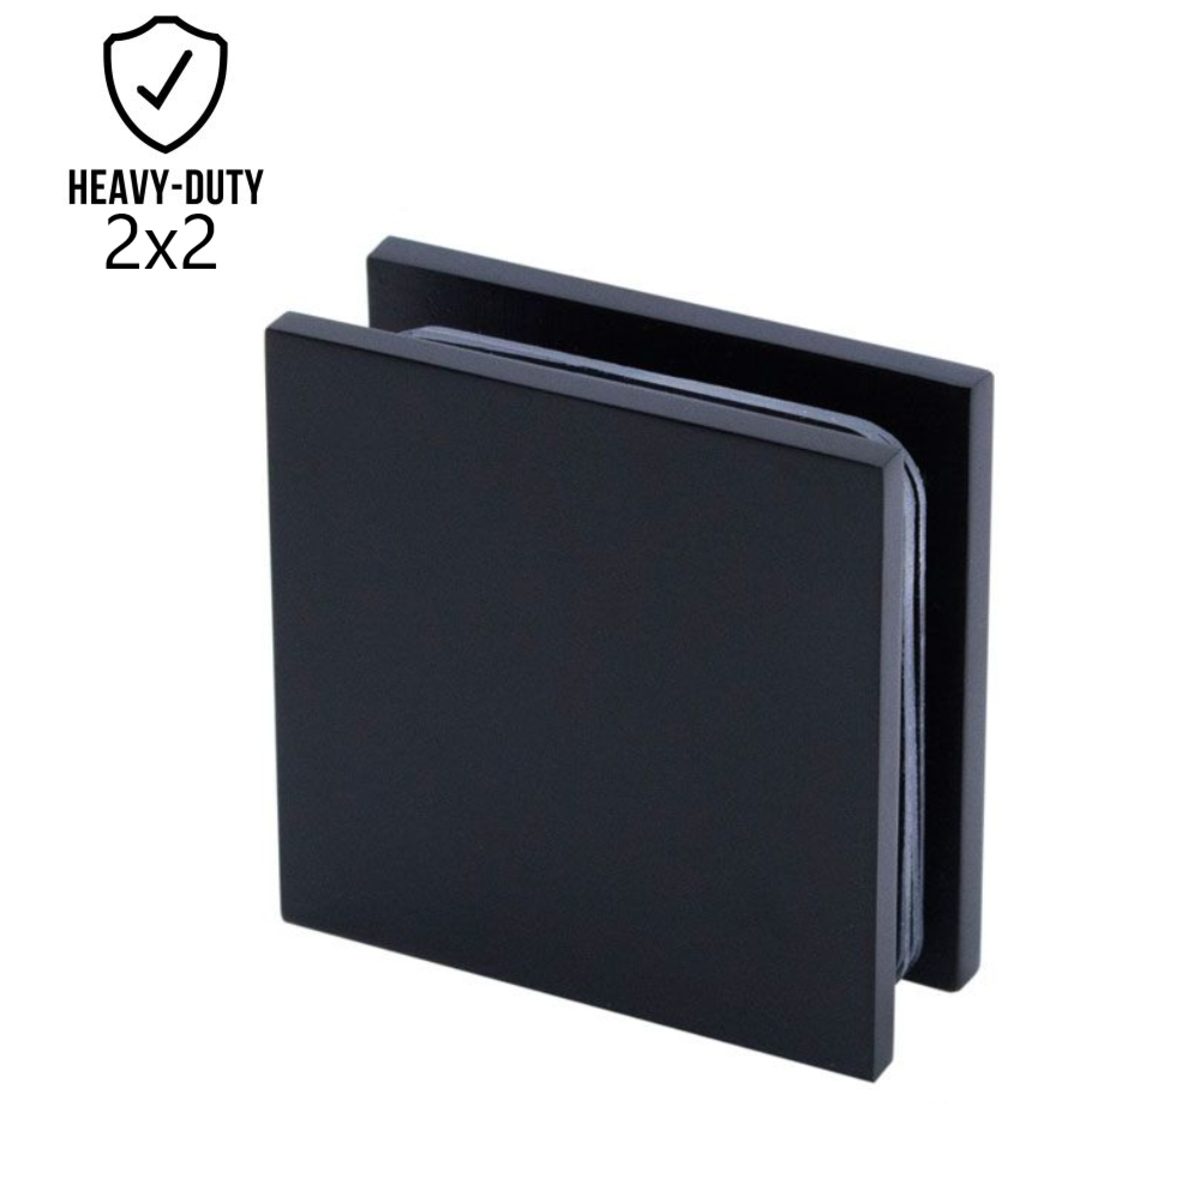 2" x 2" Heavy Duty Wall to Glass Square Edges Glass Clamp